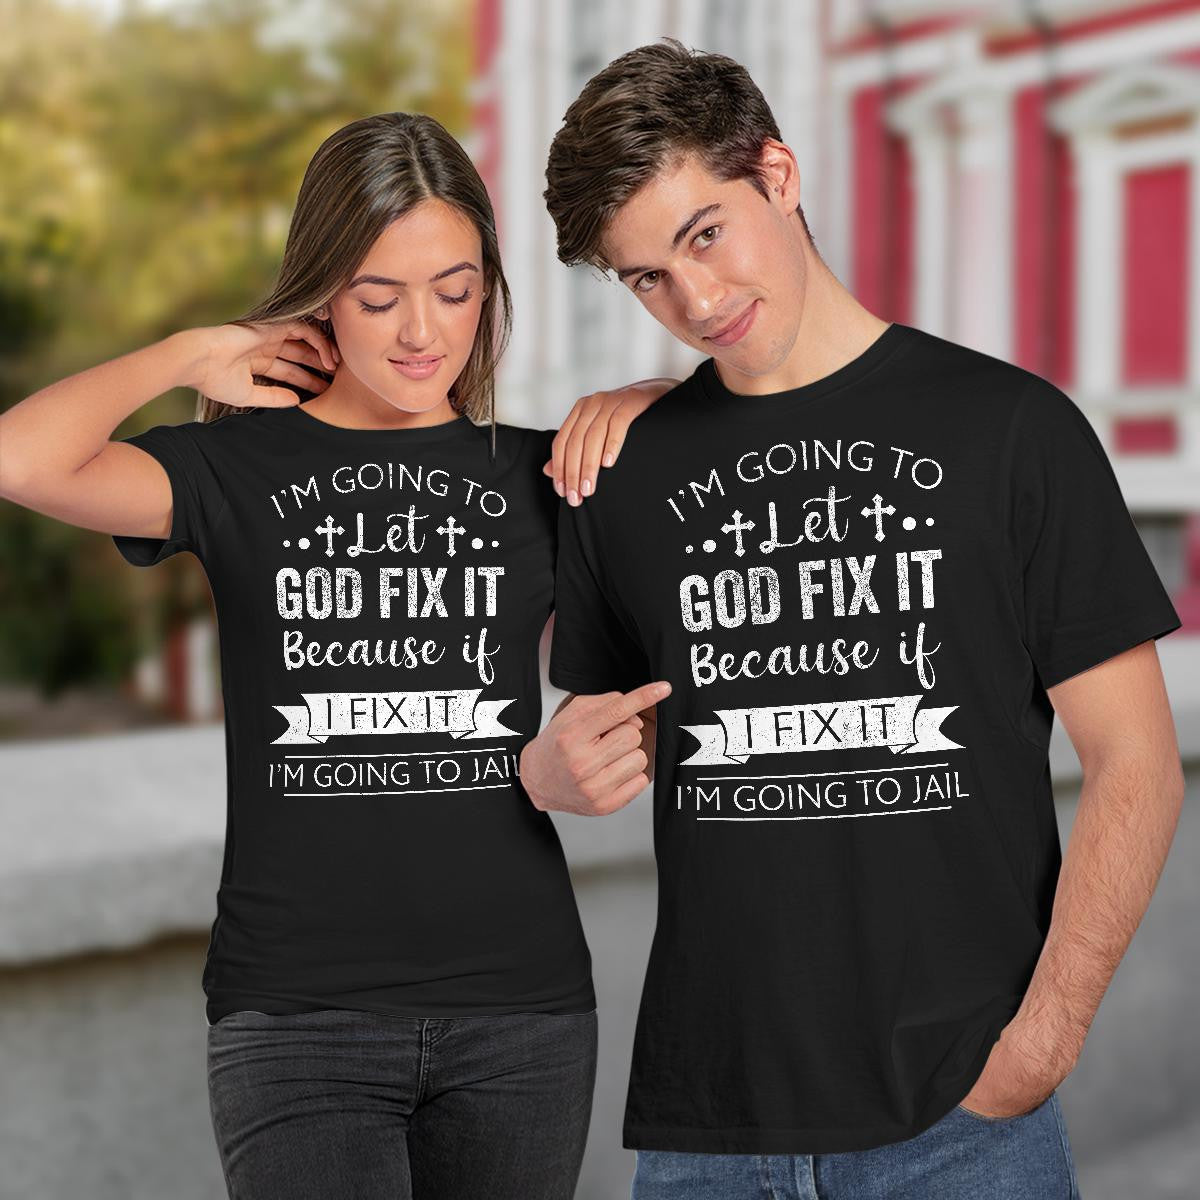 I'm Going To Let God Fix It Because If I Fix It I'm Going To Jail, God T-Shirt, Jesus Sweatshirt Hoodie